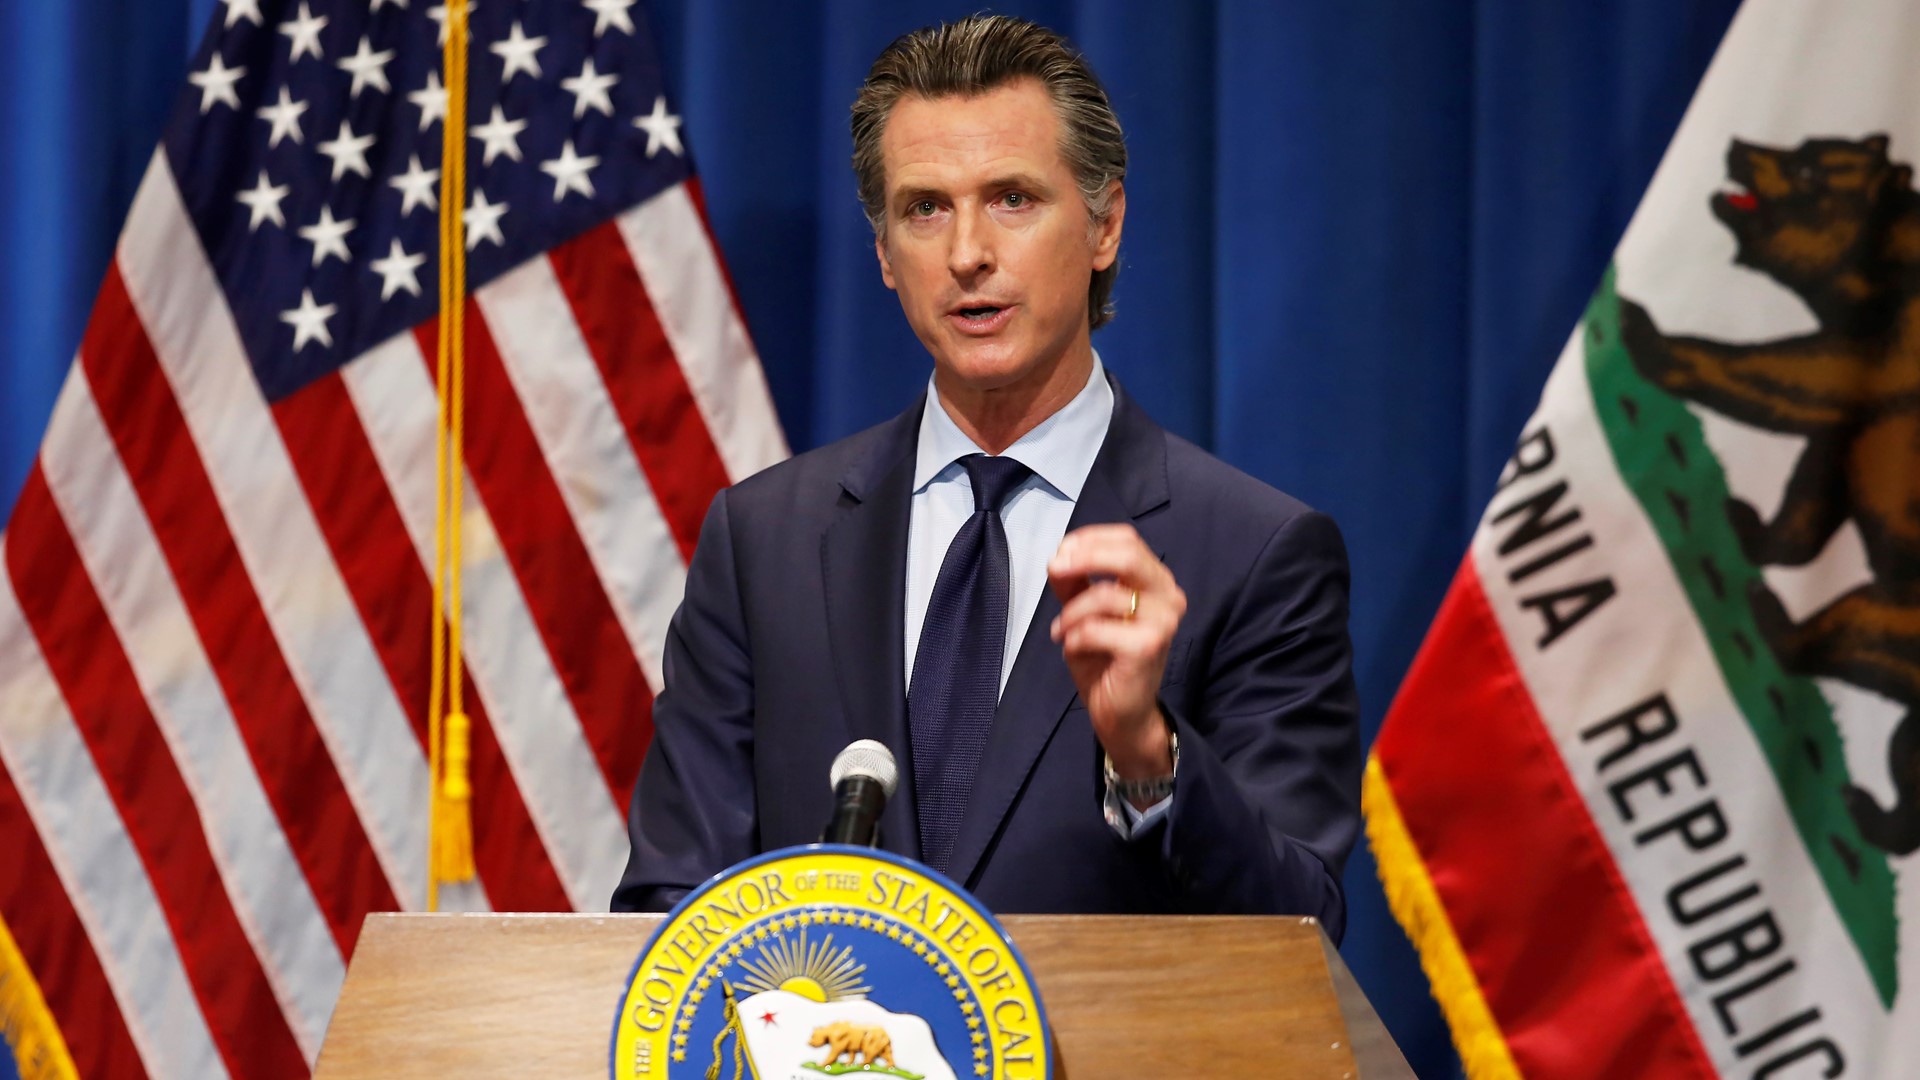 A campaign to recall Gov. Gavin Newsom has less than two months to gather 1.5 million signatures. They're getting close.